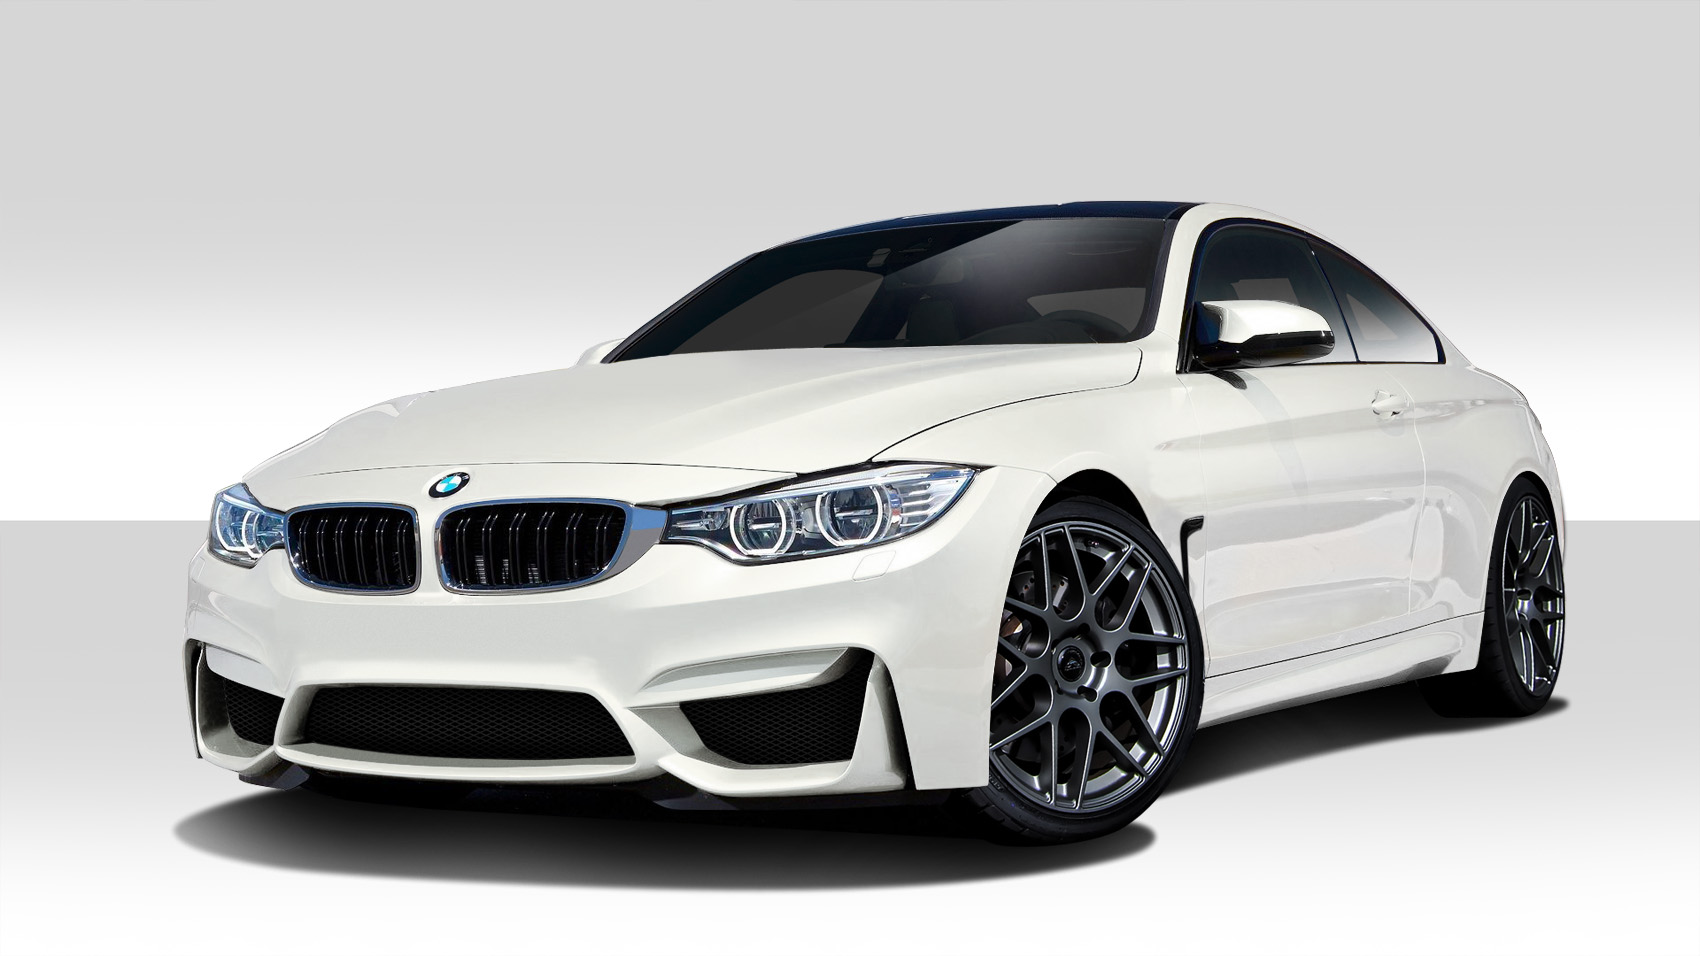 Fiberglass+ Kit Body Kit for 2014 BMW 4 Series   - 2014-2019 BMW 4 Series F32 M4 Look Kit - 4 Piece - Includes M4 Look Front Bumper Cover (112227), M4 Look Side Skirt Rocker Panels (112228), M4 Look Rear Bumper Cover (112229)